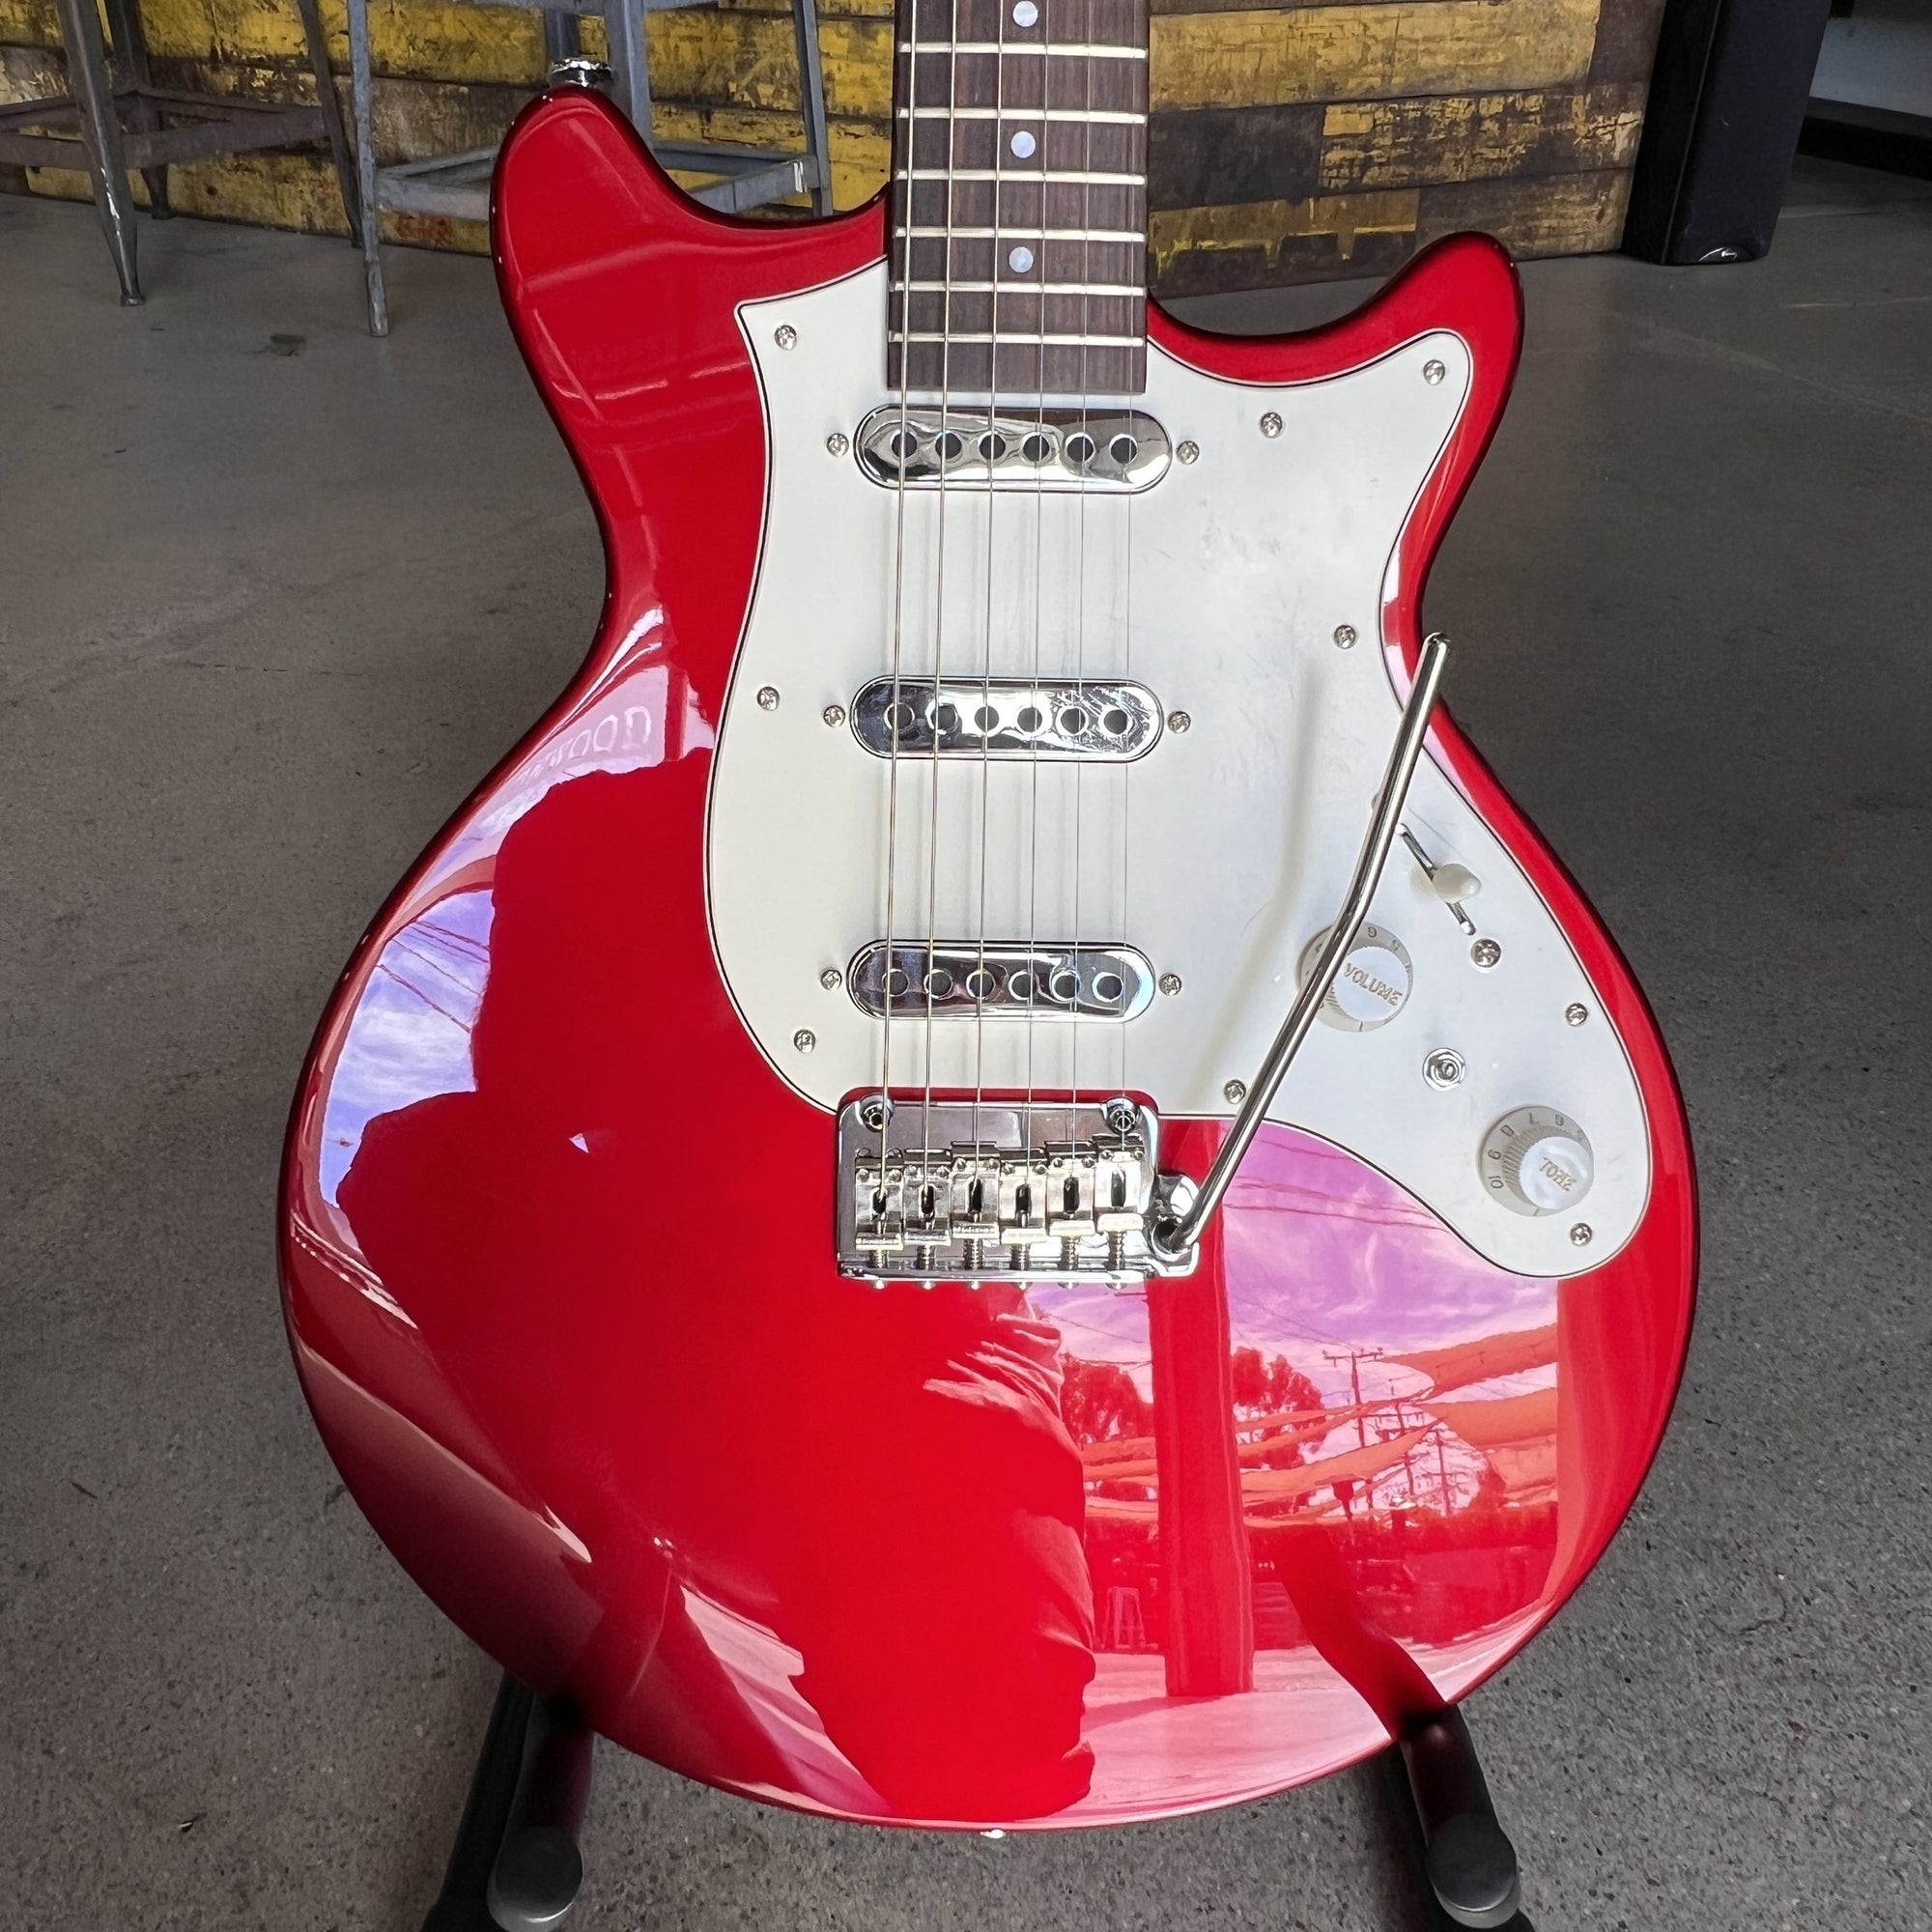 KZ Guitar Works KWG22 3S11, Old Candy Apple Red